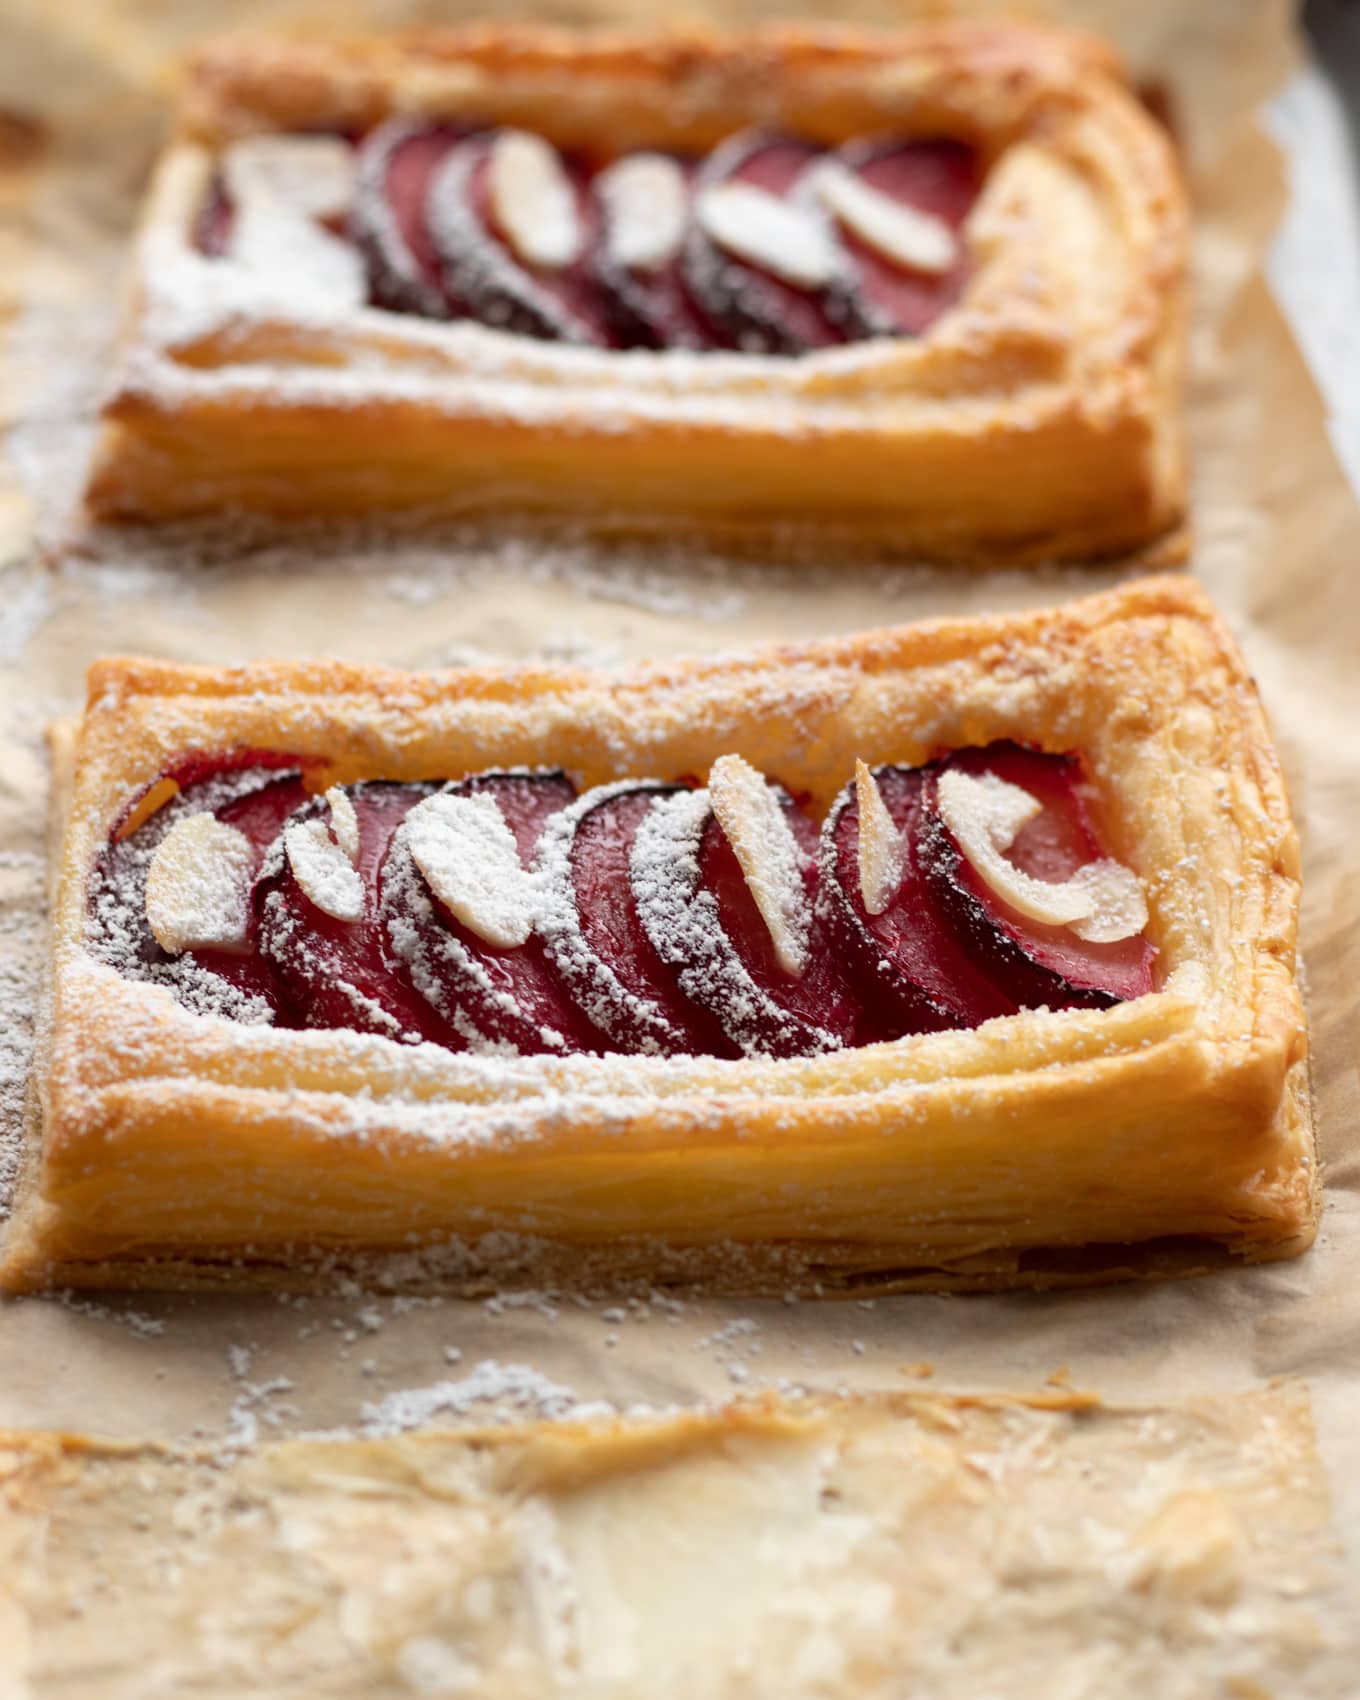 Plum tarts with slices almond and a dust of icing sugar